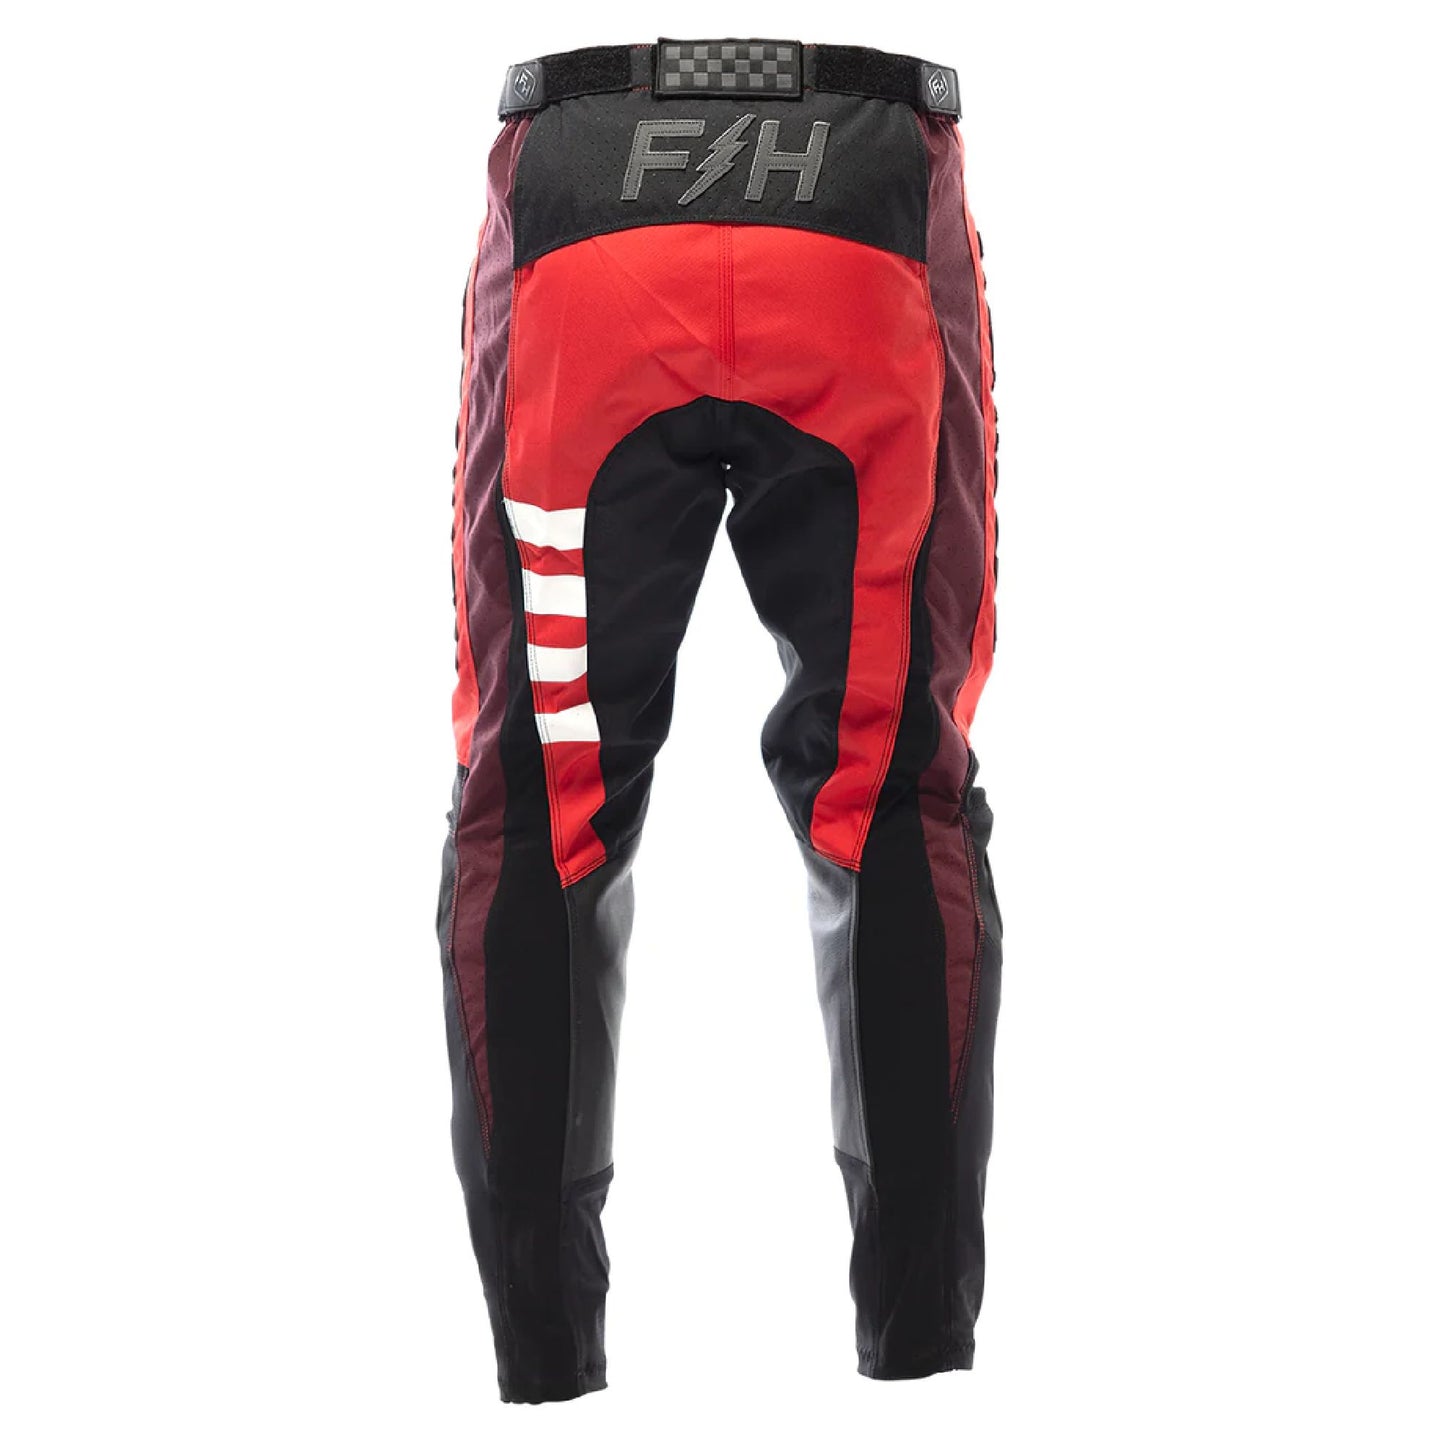 Fasthouse Grindhouse Pants Red/Black Bike Pants